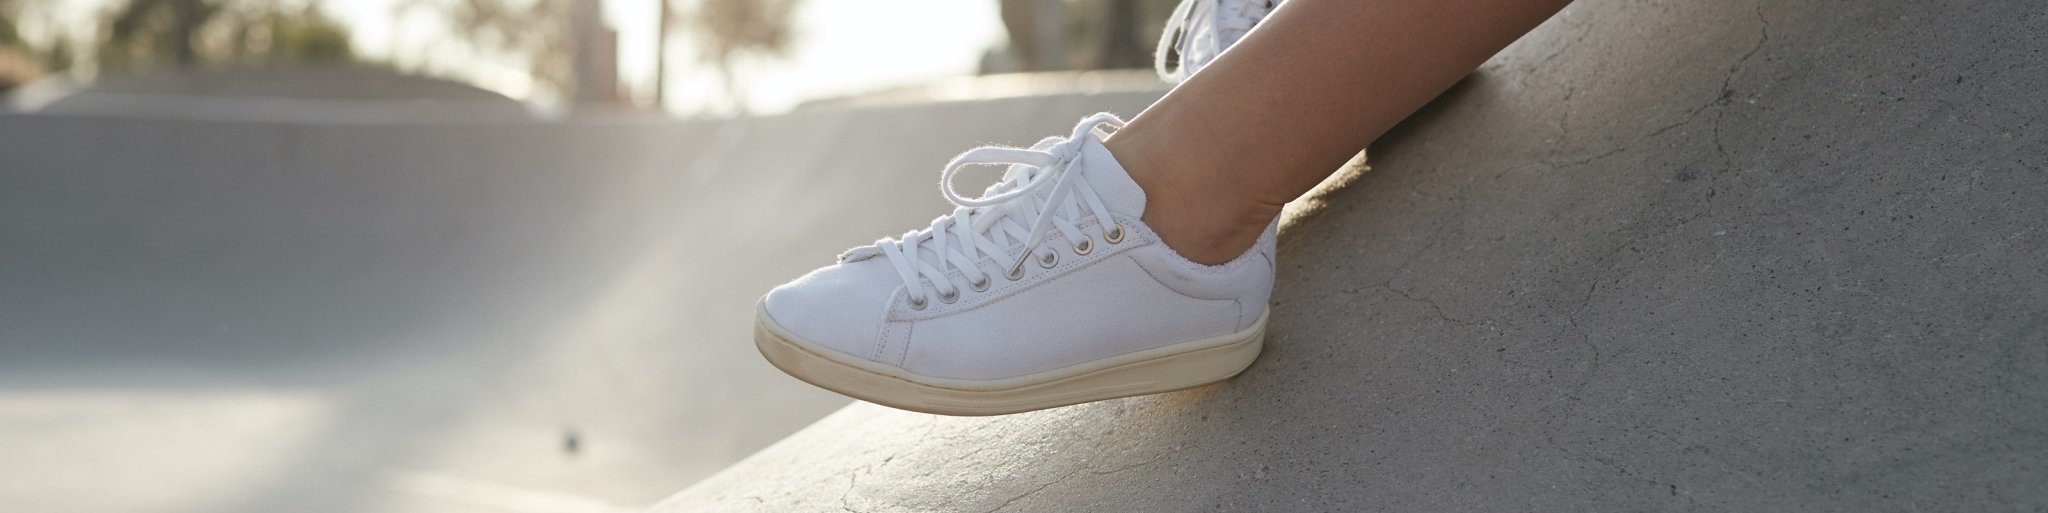 Ethical Women’s Trainers | WAES-store